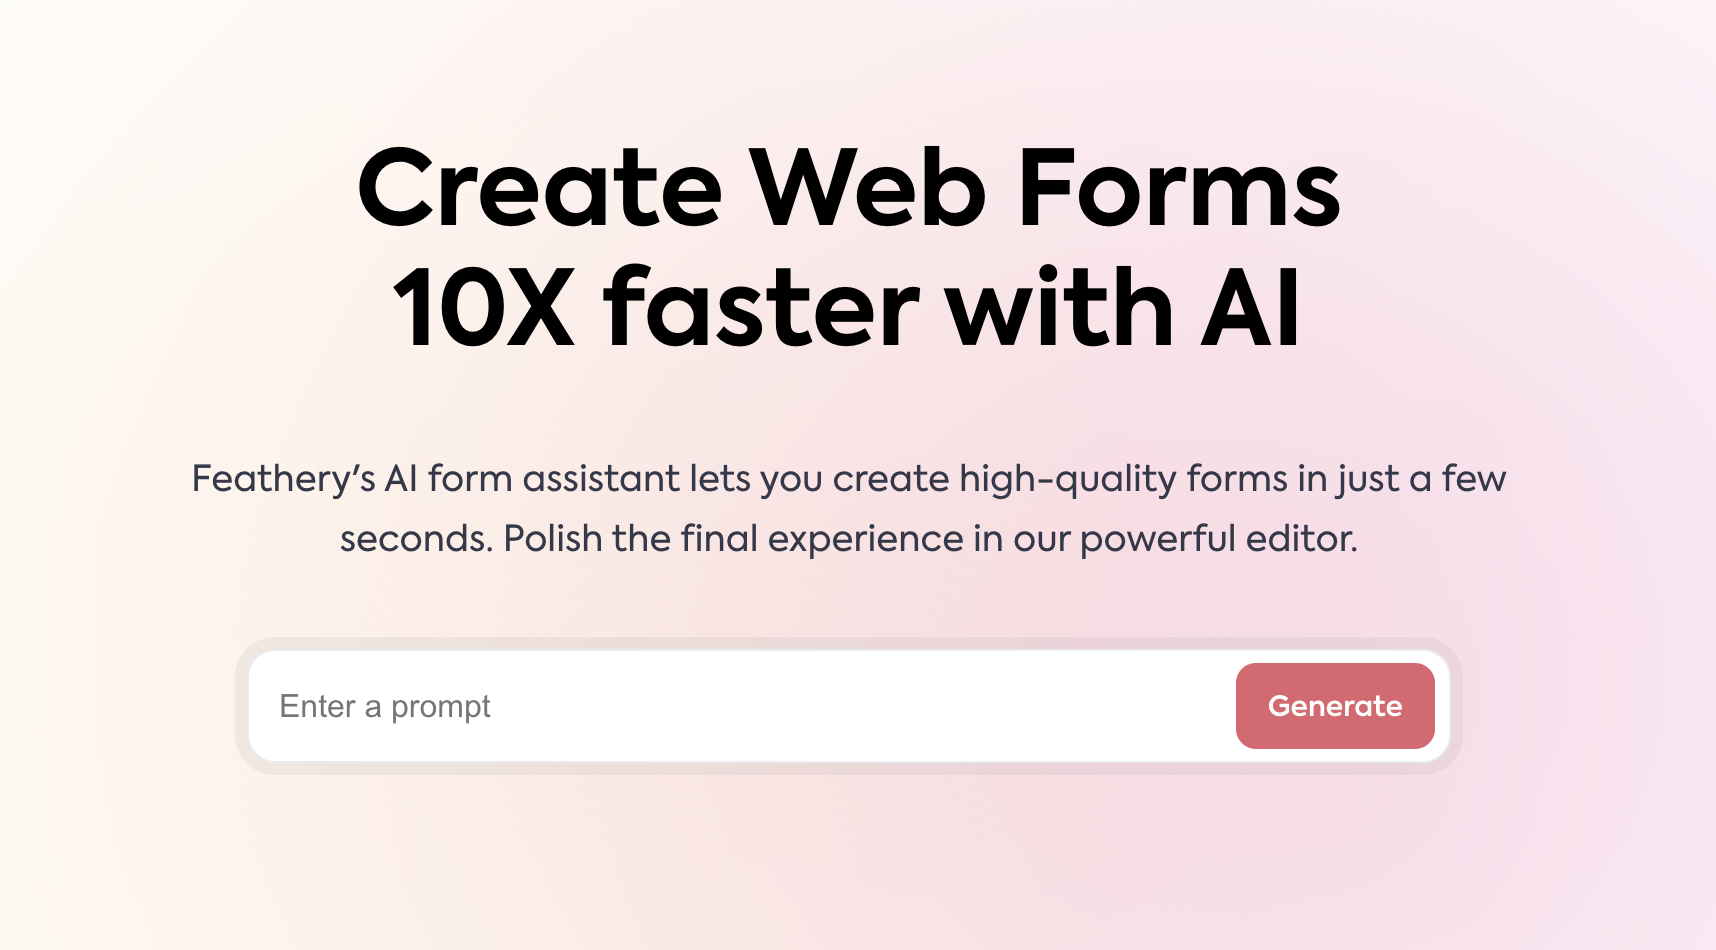 Feathery - A platform for form assistance to create and customize web forms